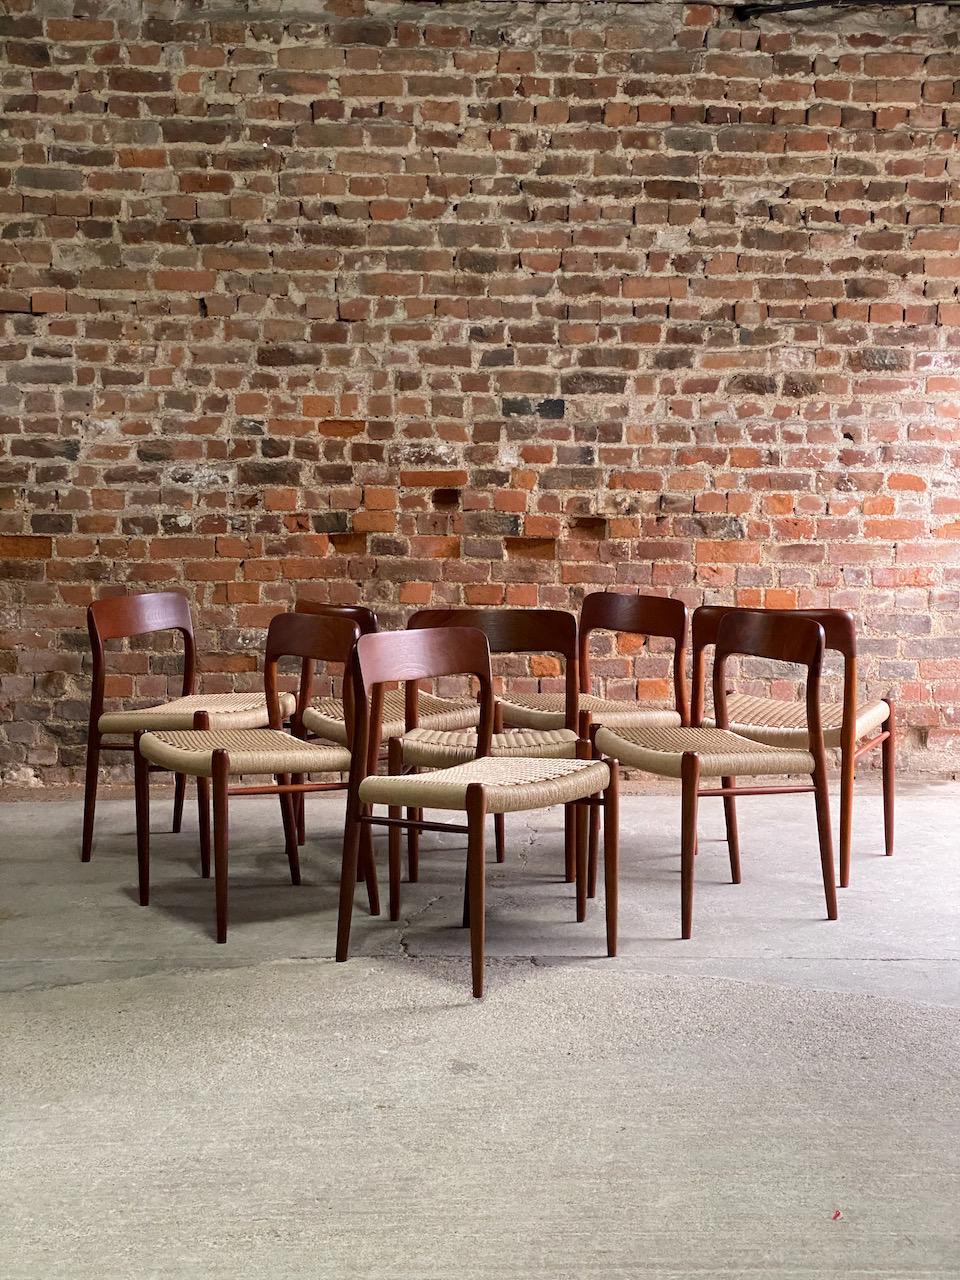 Niels Moller Model 75 teak and paper cord dining chairs set of eight, Denmark, 1970.

Magnificent set of Eight Niels Otto Møller Model 75 teak and paper Cord dining chairs manufactured by J.L. Møllers Møbelfabrik Denmark, circa 1970, the solid